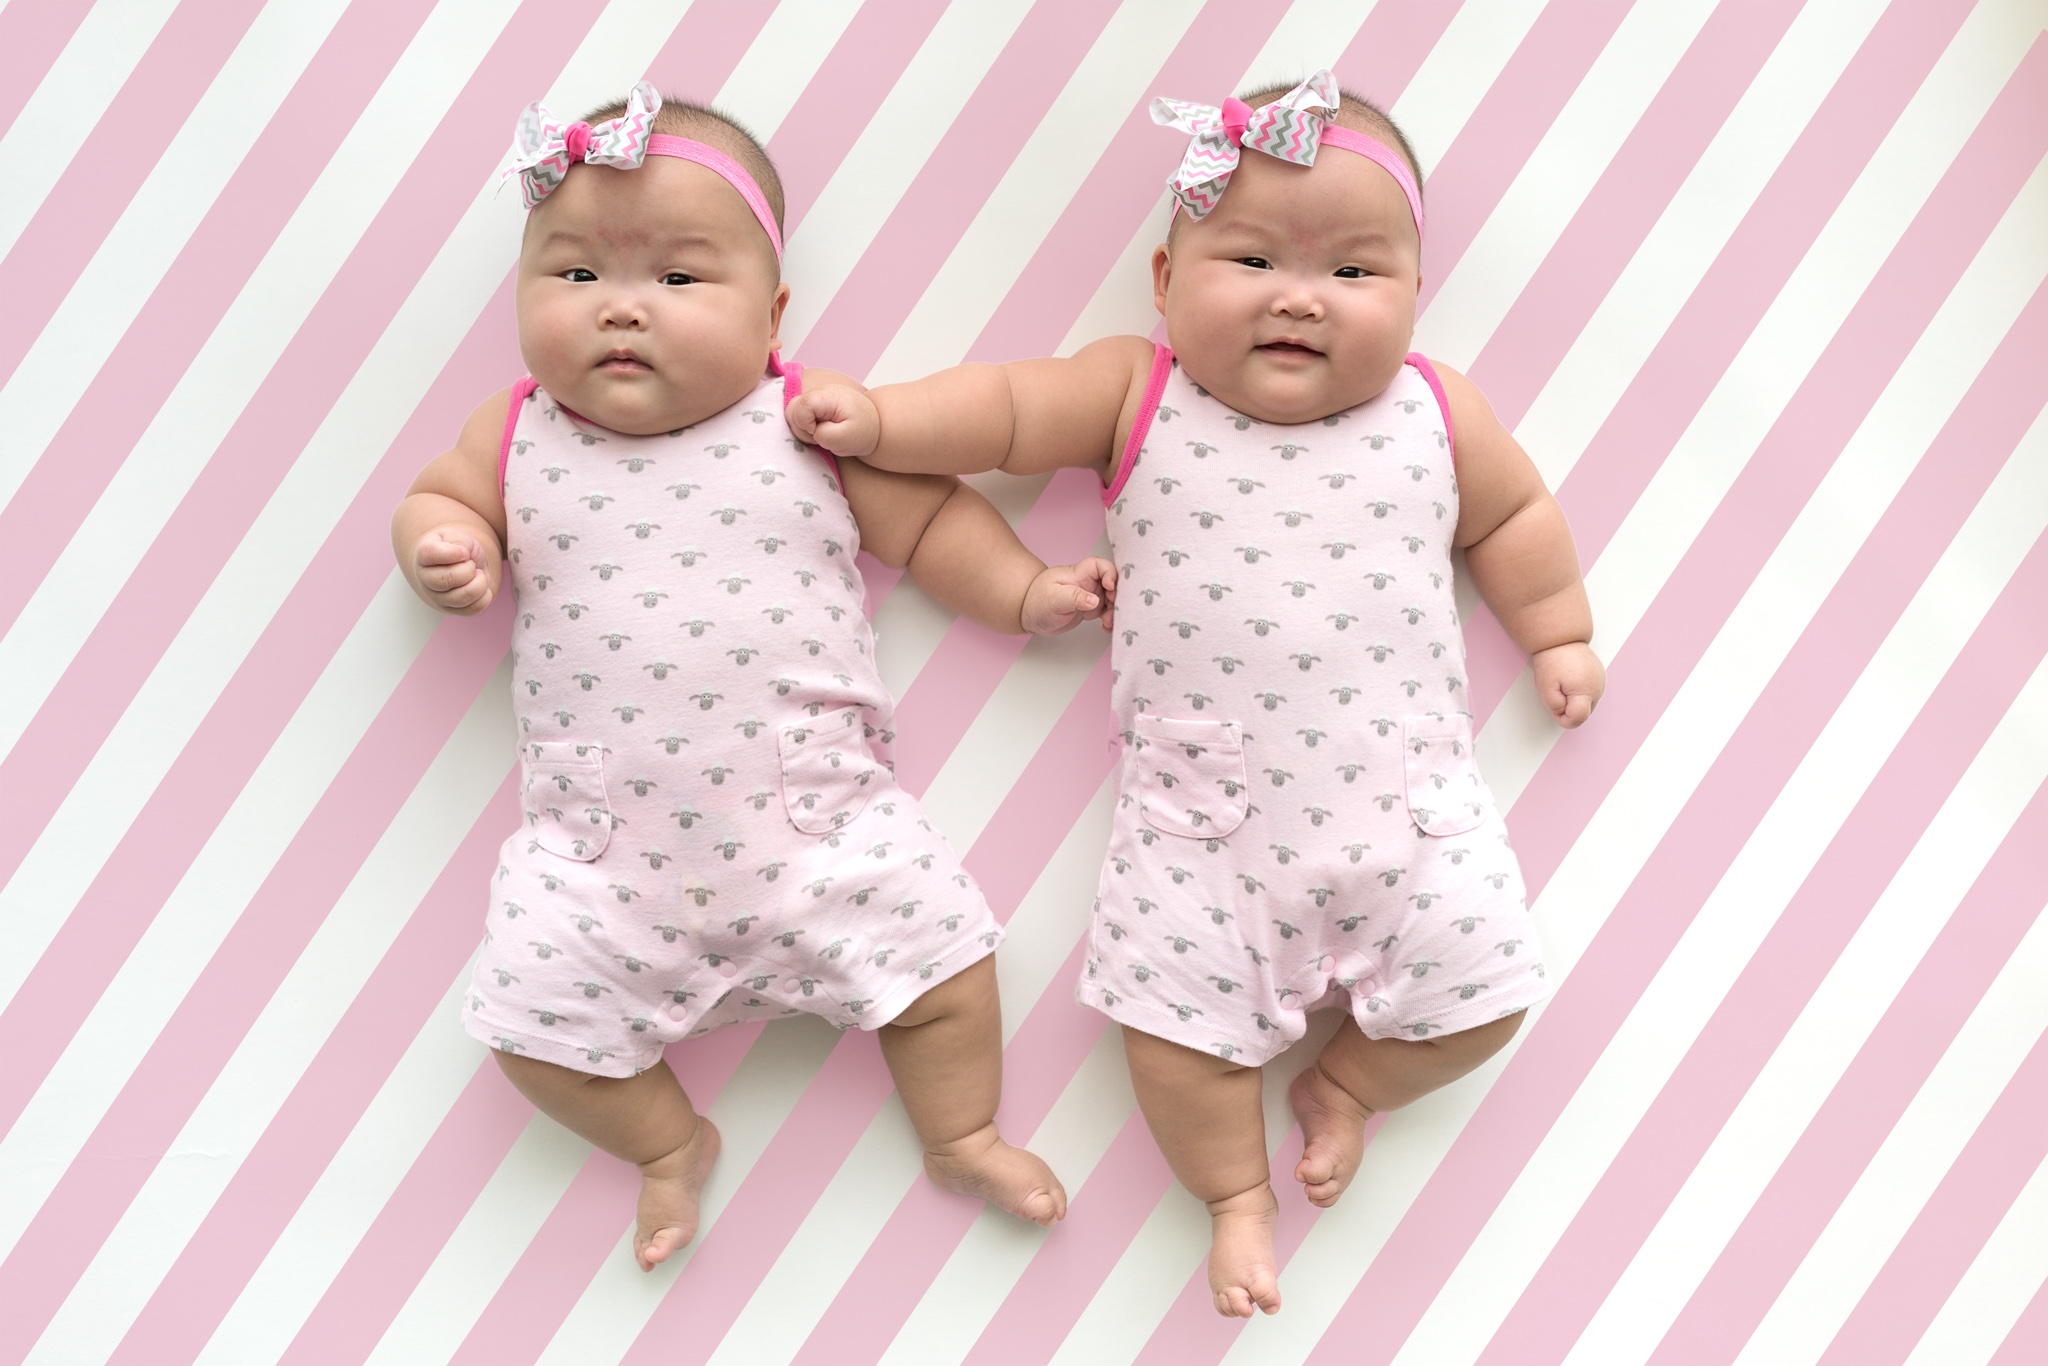 The cutest twins on the block, Singapore  - Apr 2016